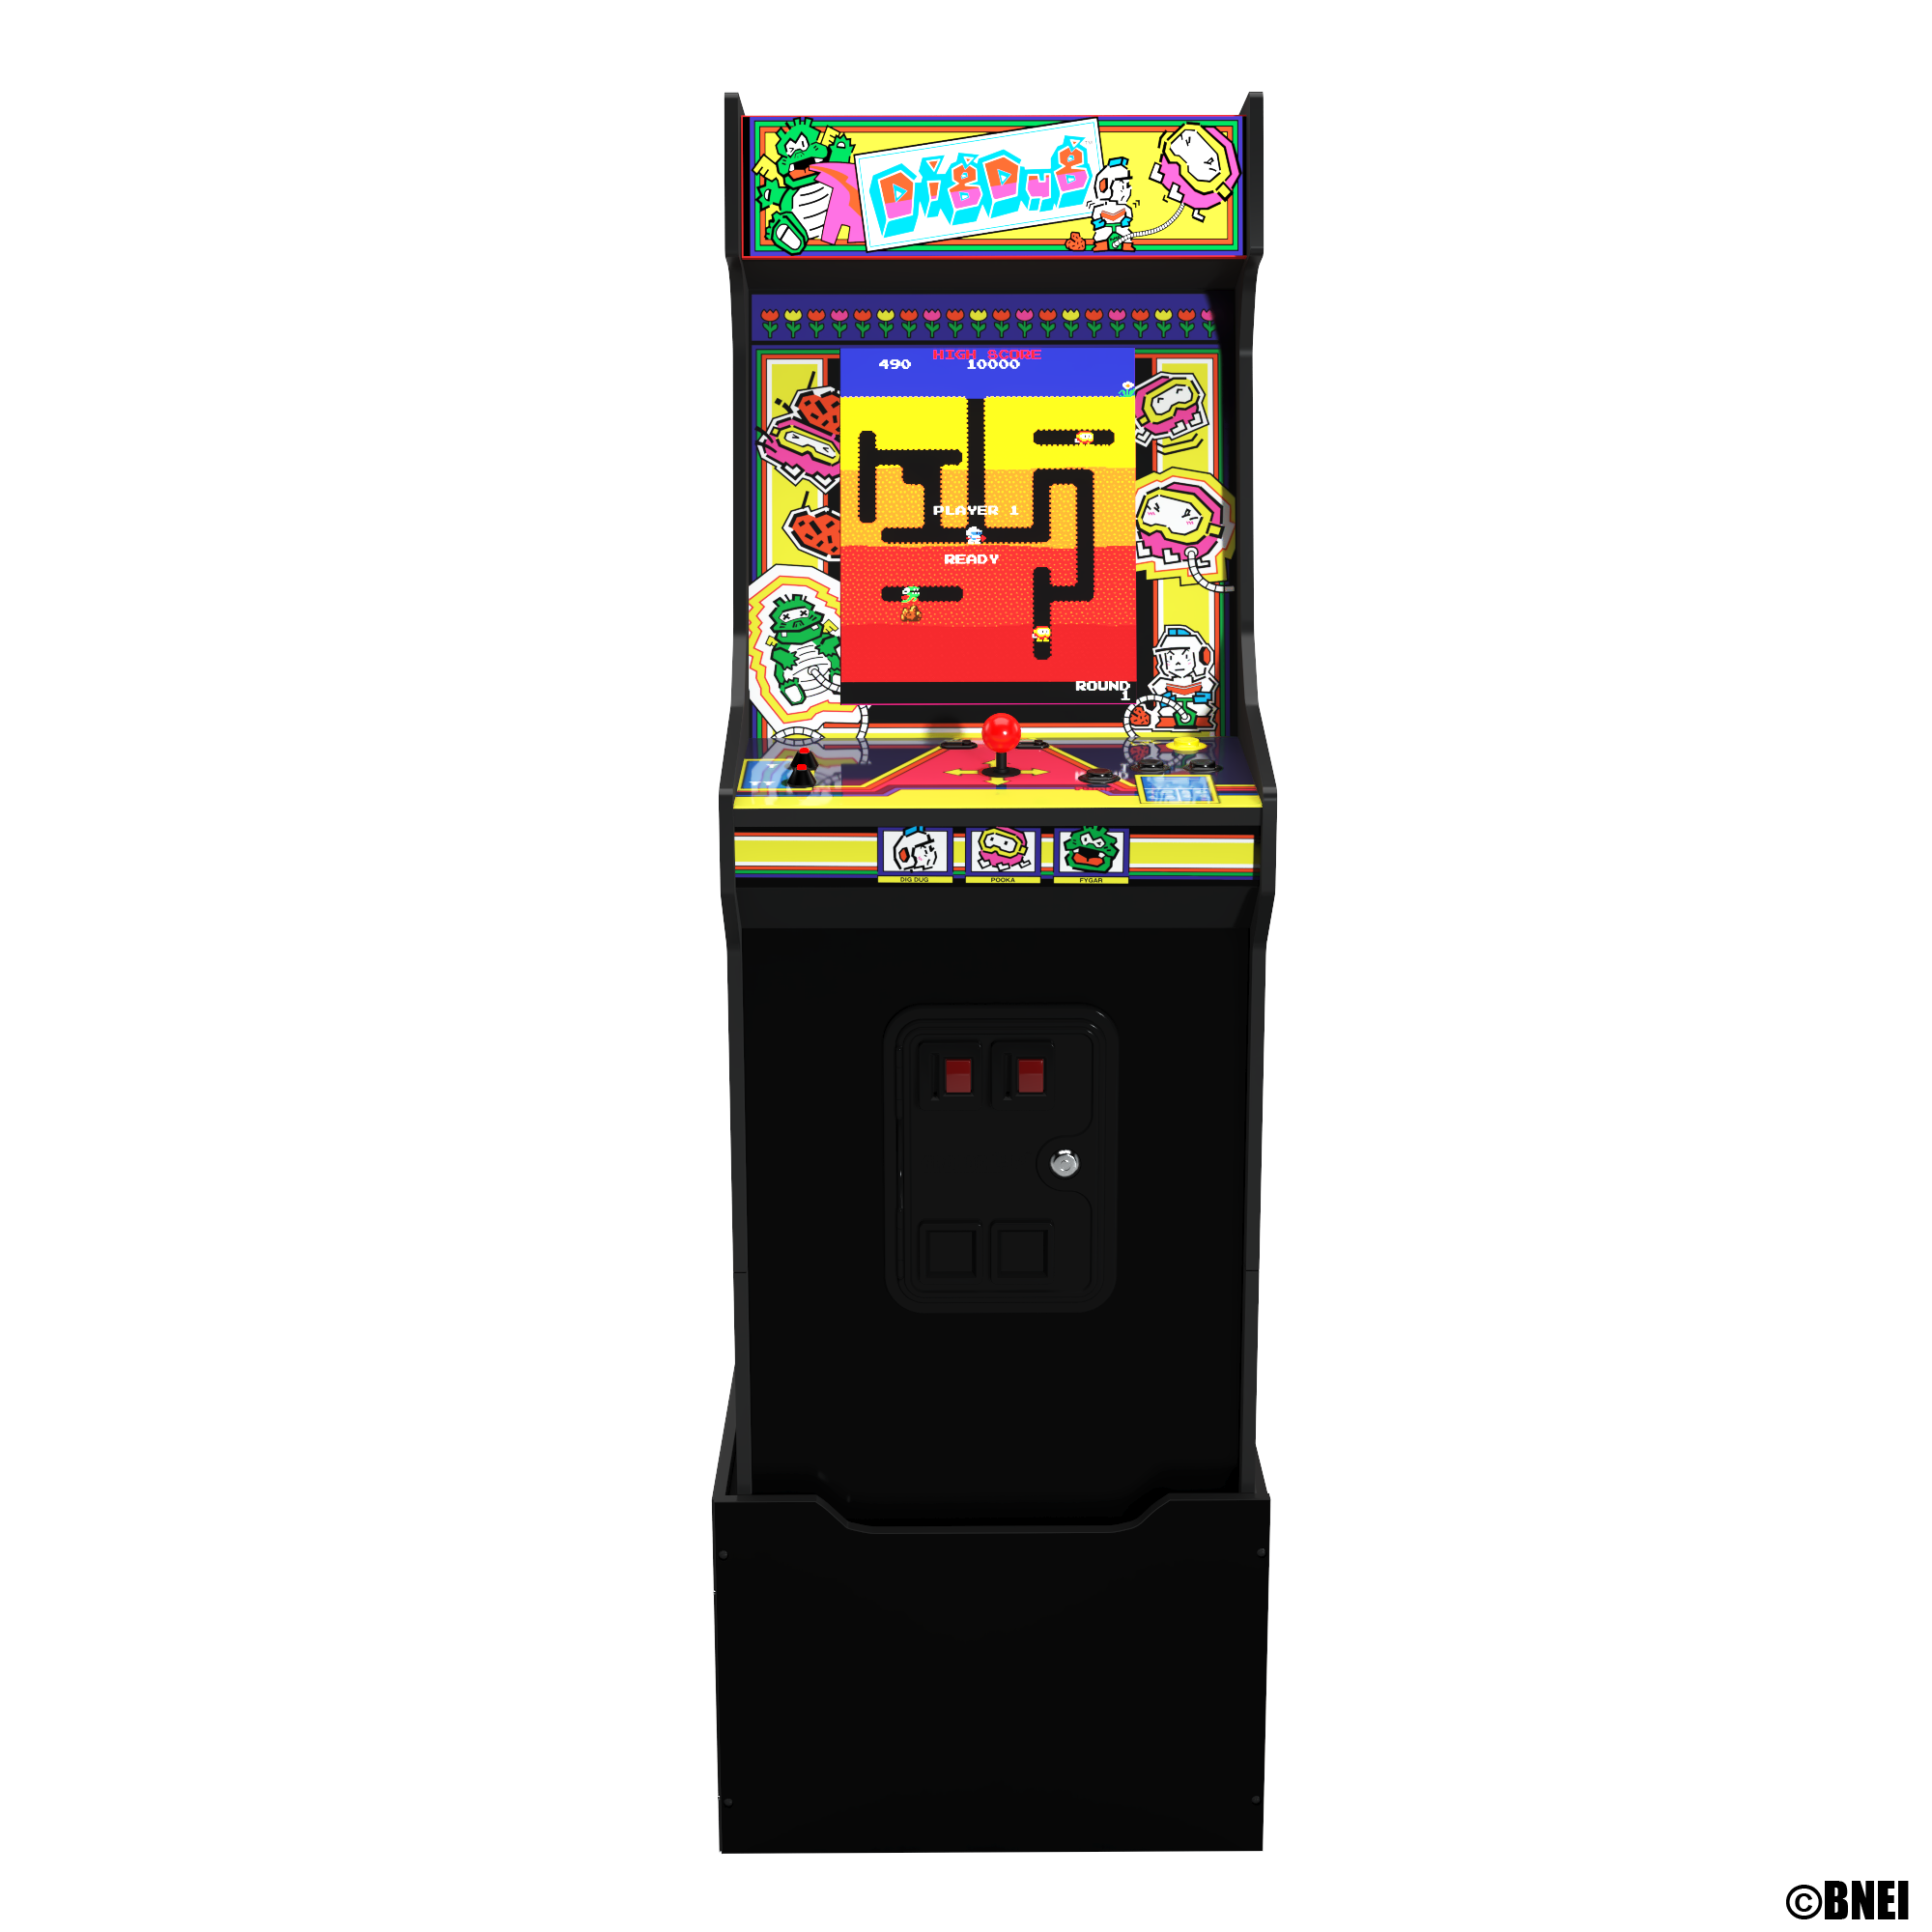 Arcade1Up Dig Dug Bandai Namco Legacy Edition Arcade with Riser and Light-Up Marquee - image 7 of 7